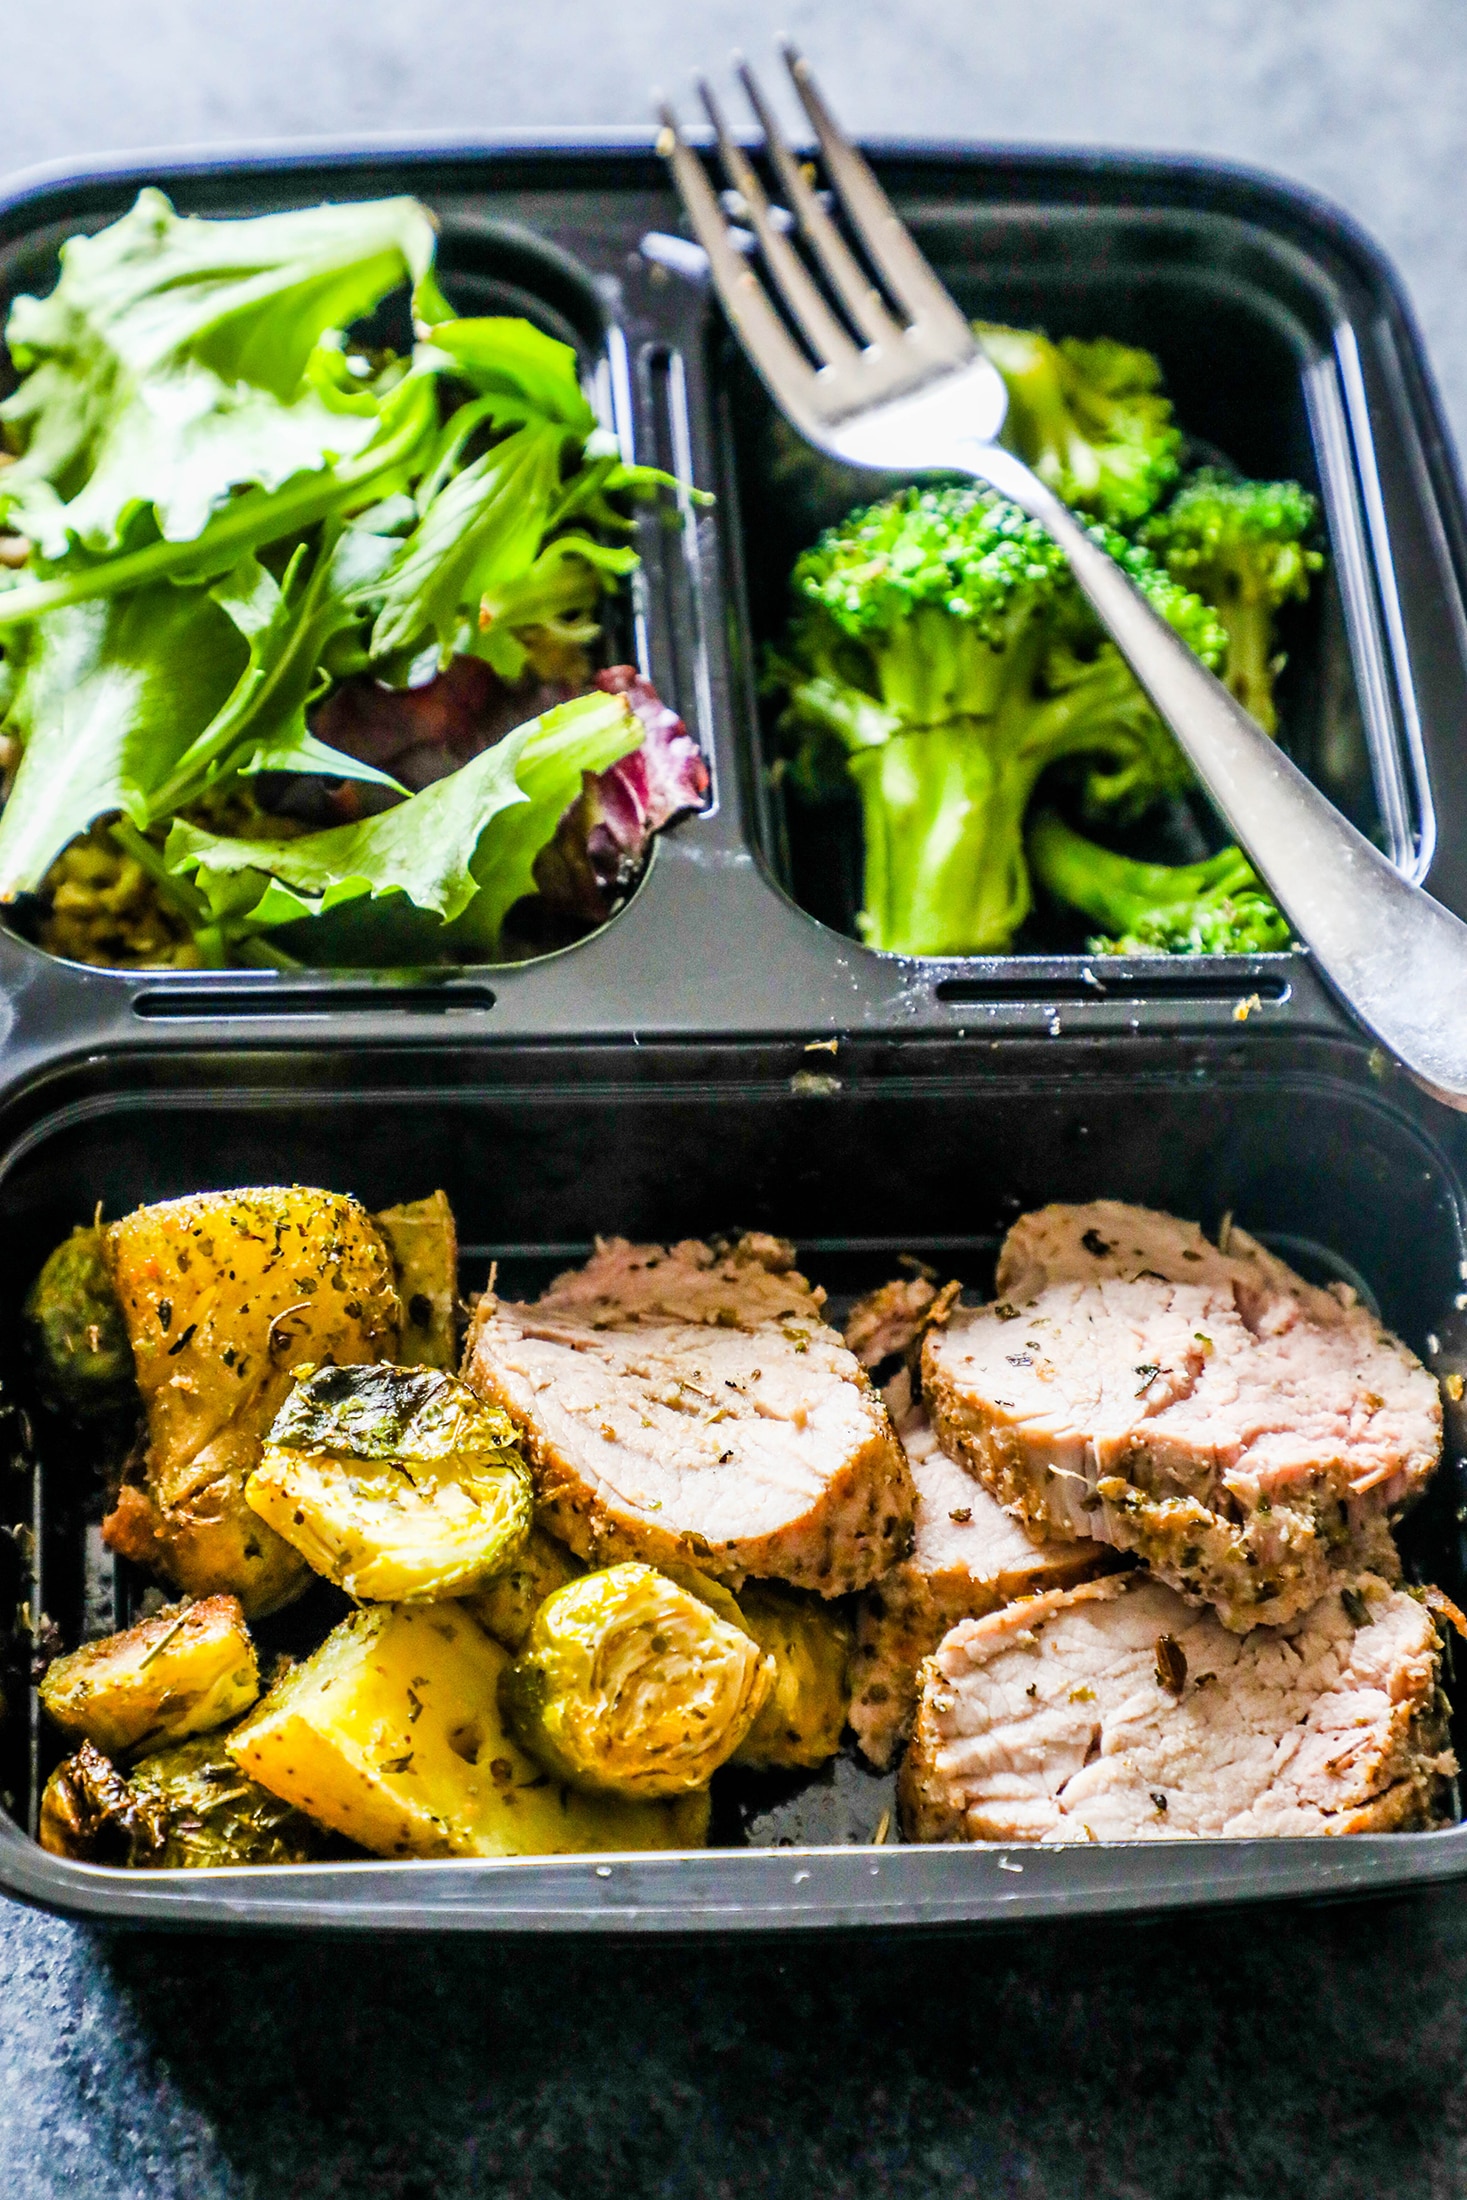 pork covered in italian herbs and veggies on the side sliced in a container with salad and broccoli